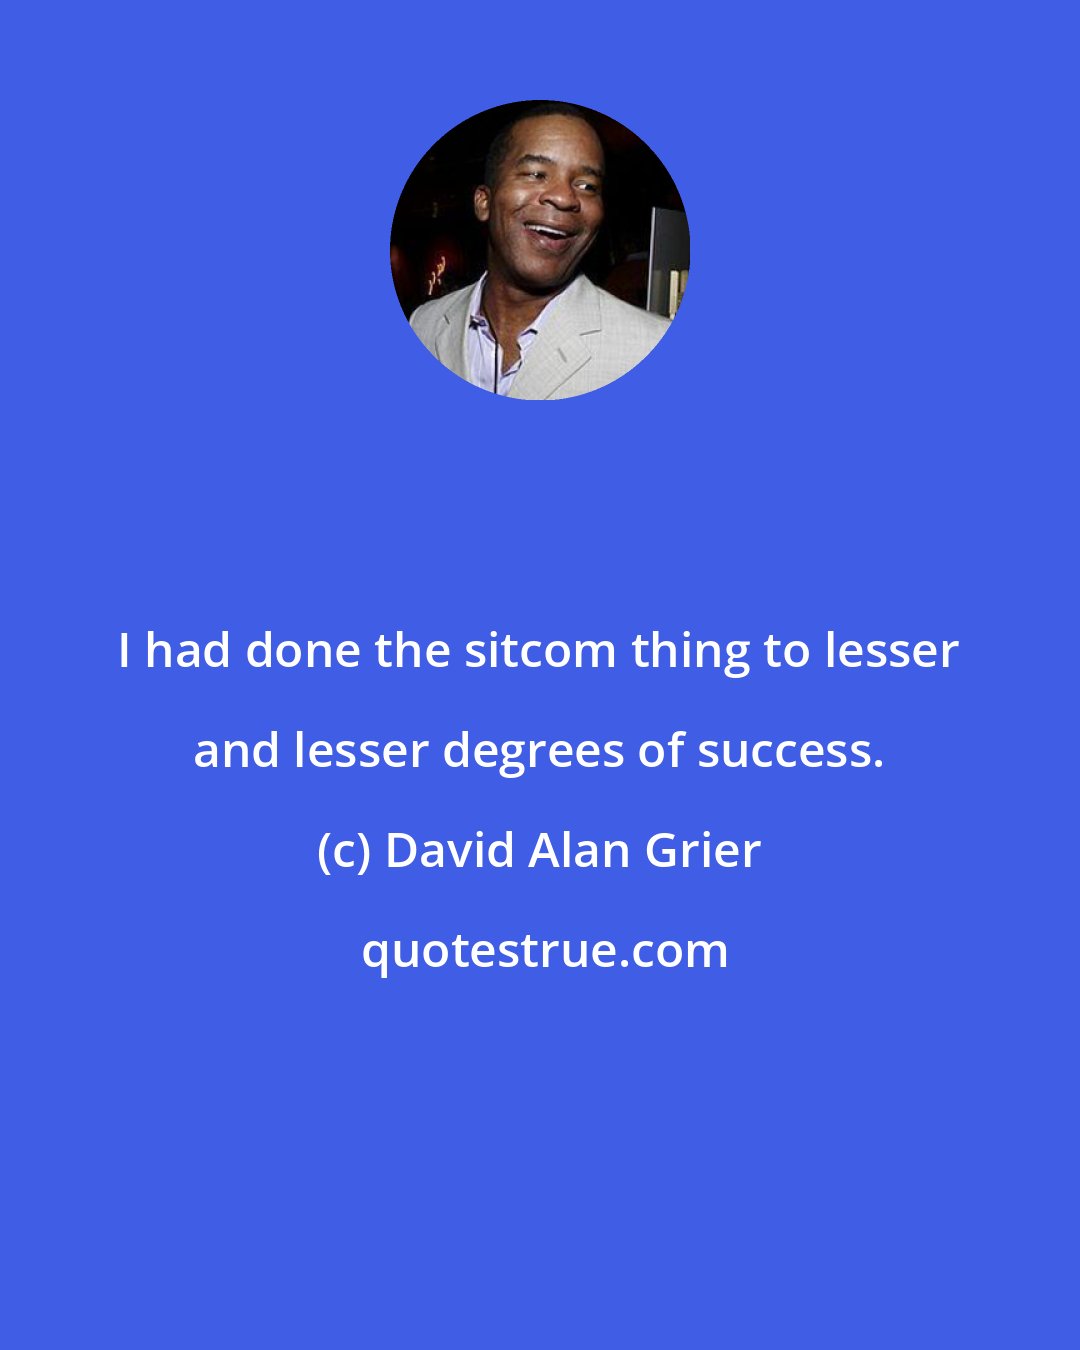 David Alan Grier: I had done the sitcom thing to lesser and lesser degrees of success.